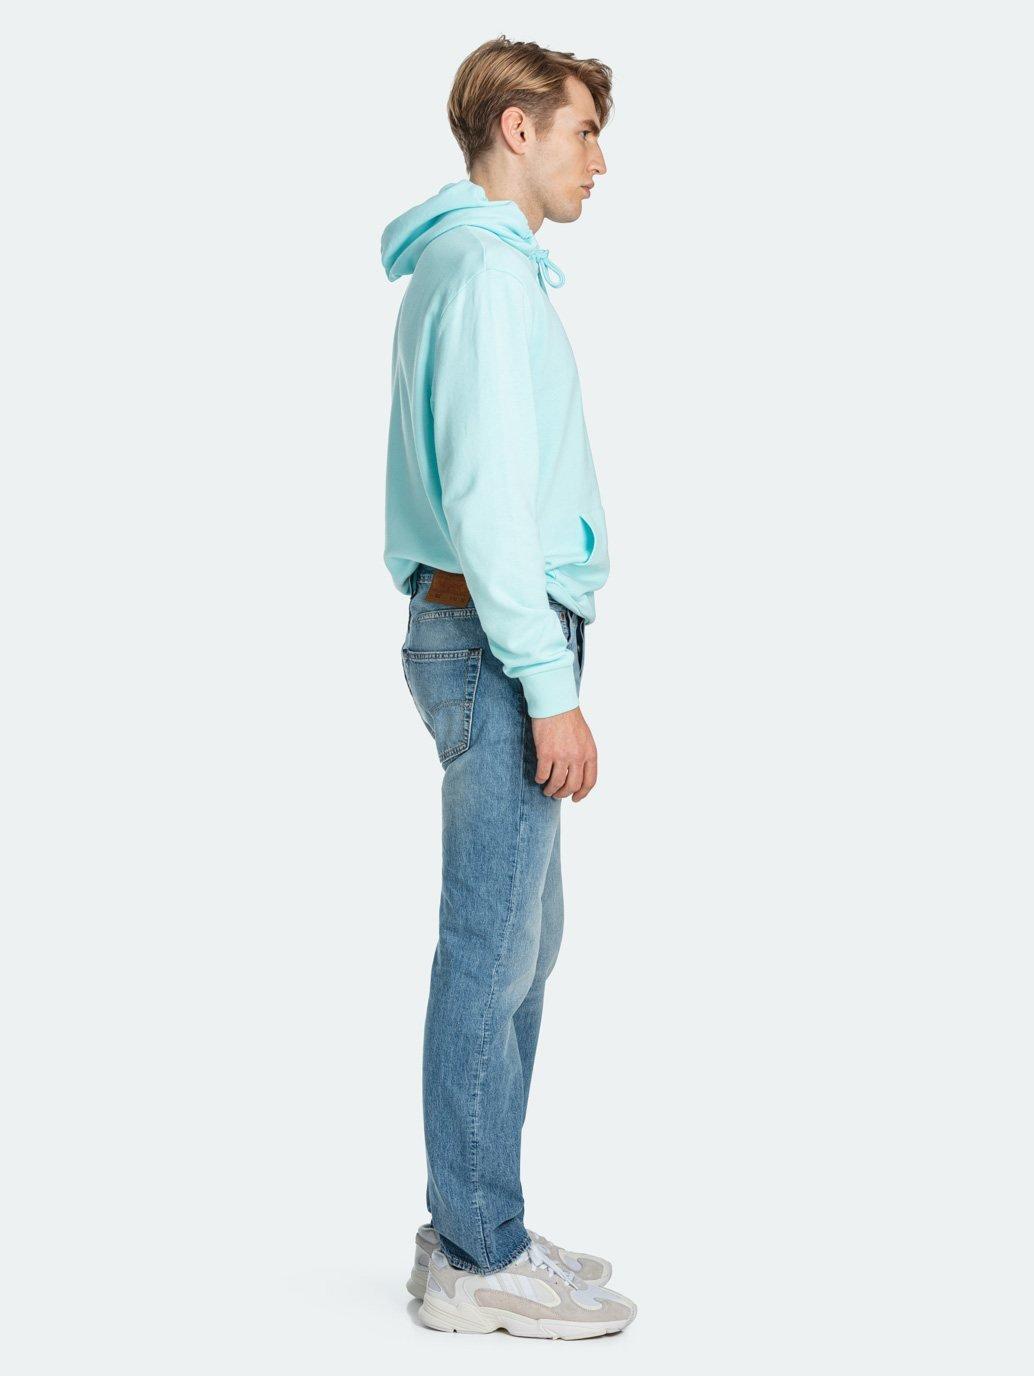 levis malaysia 501 original fit jeans for men menta cool side view